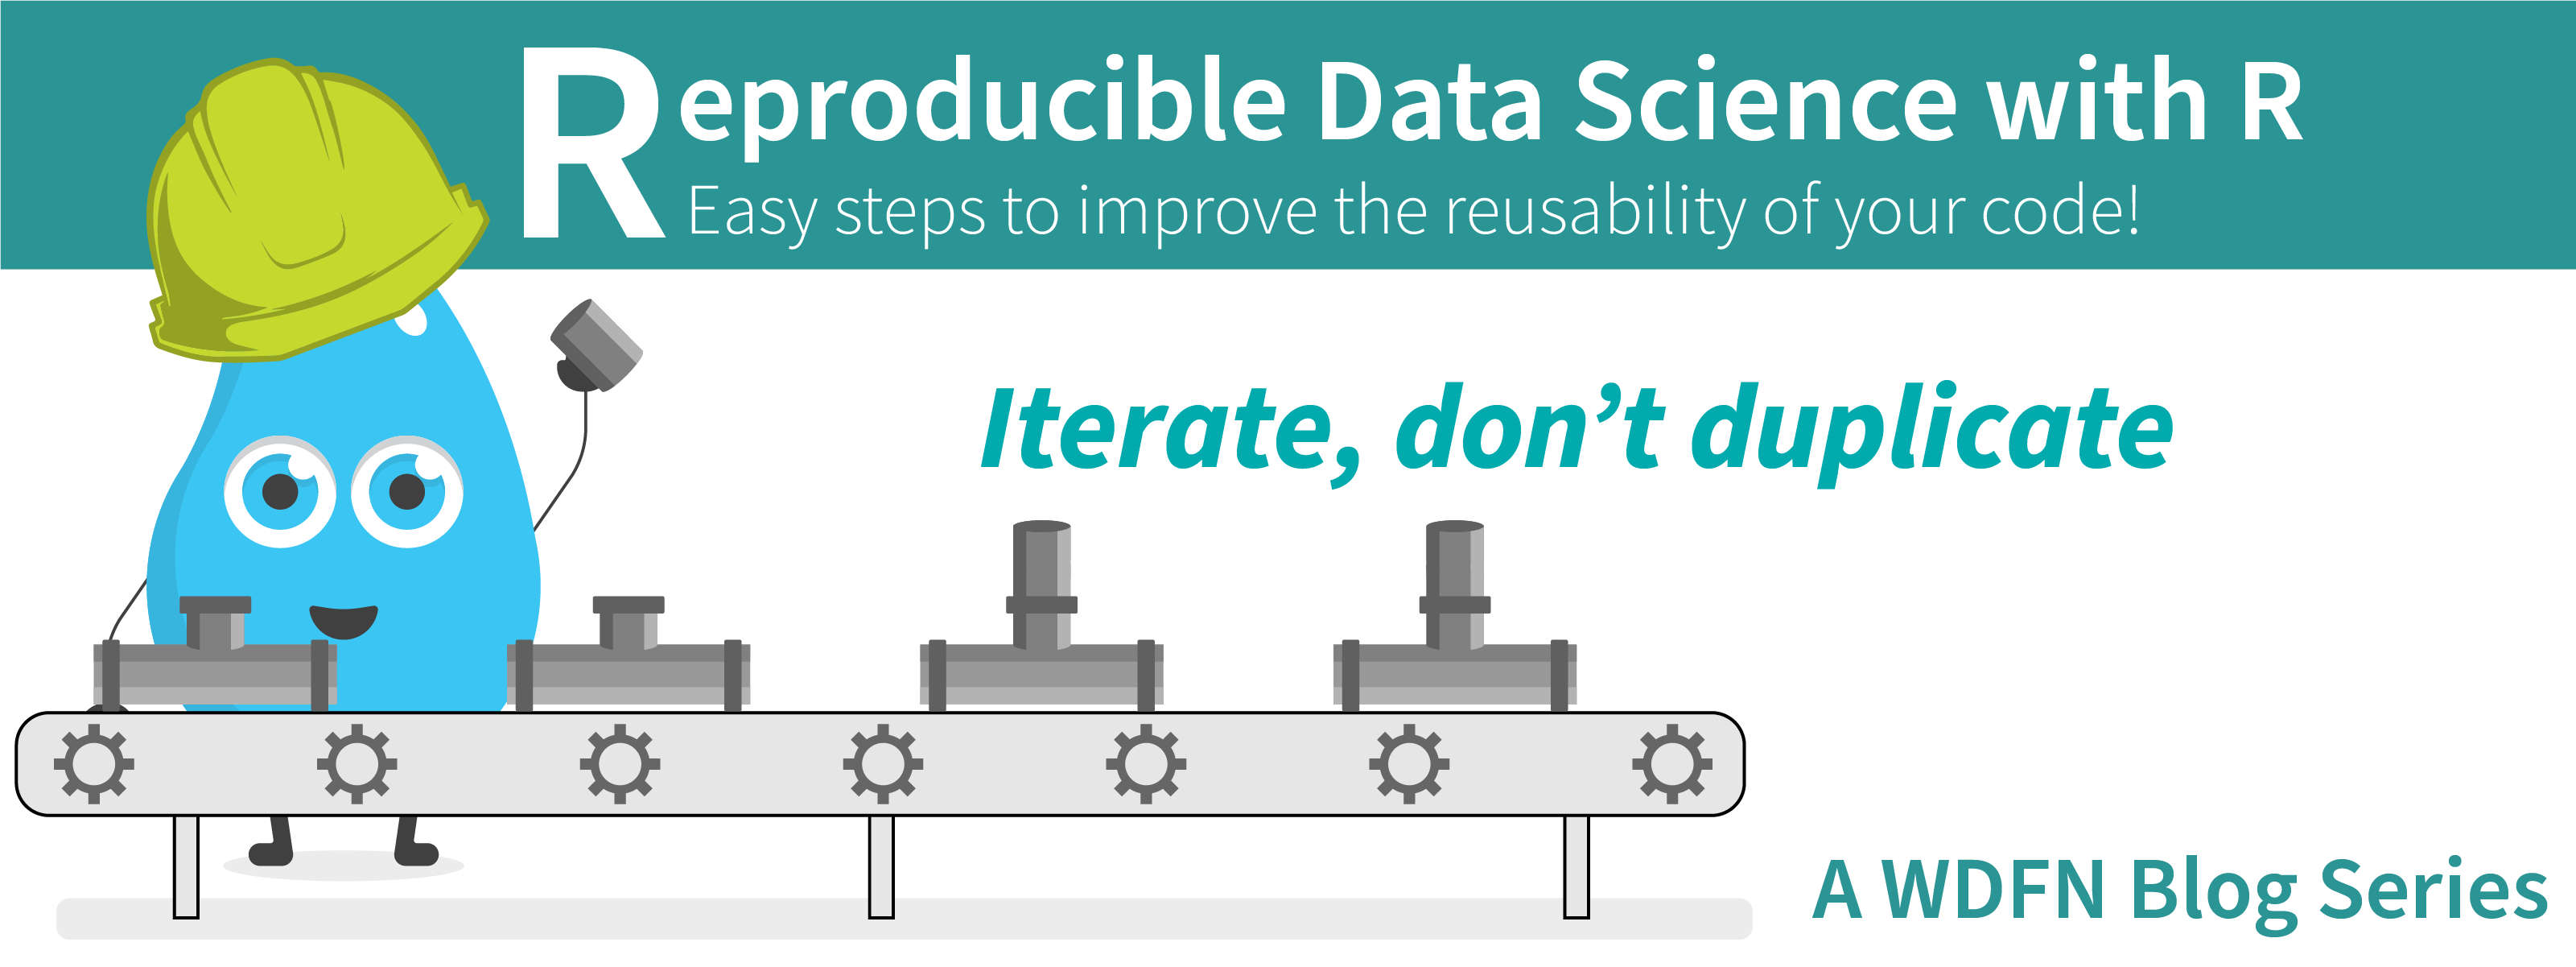 Illustration of a personified, cartoon water droplet wearing a yellow construction hat and working to build pipelines on a conveyer belt. Text: Iterate, don't duplicate. Reproducible Data Science with R. Easy steps to improve the reusability of your code! A W.D.F.N. Blog Series.